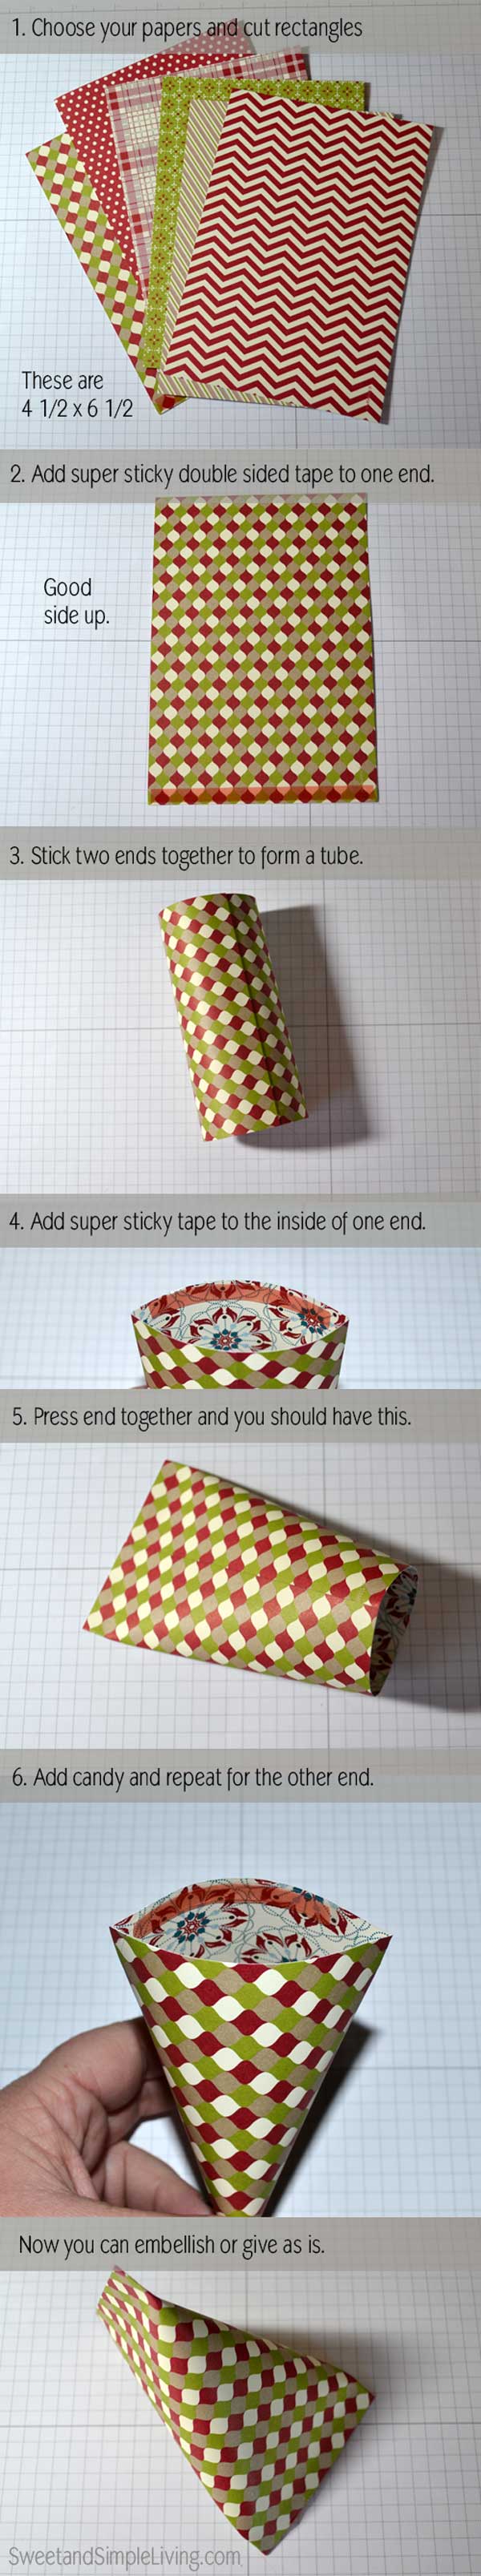 Christmas Paper Craft Ideas Sour Cream Container Instructions